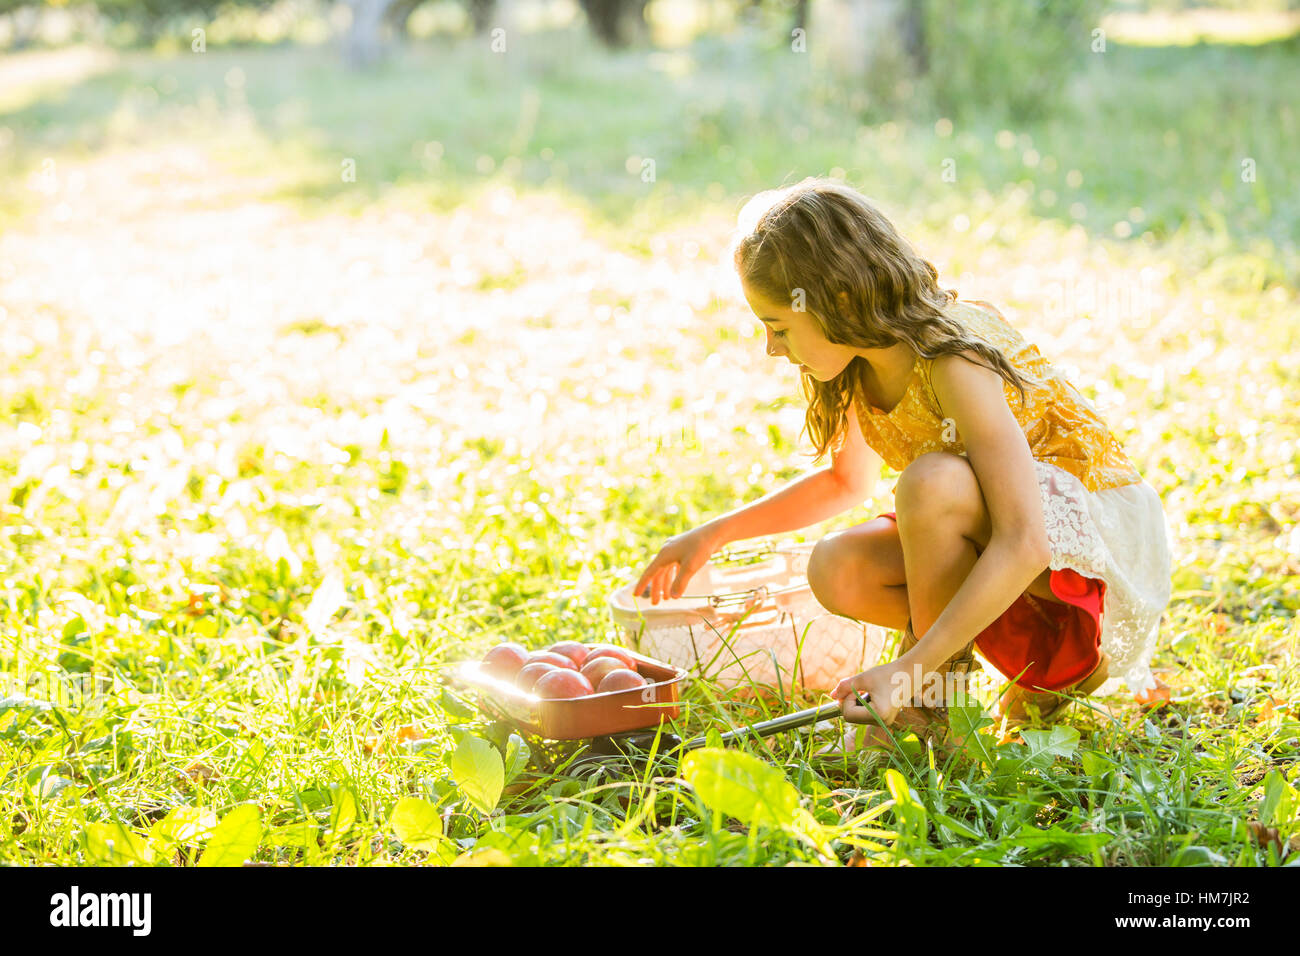 Girl with fruit crouching in grass Stock Photo